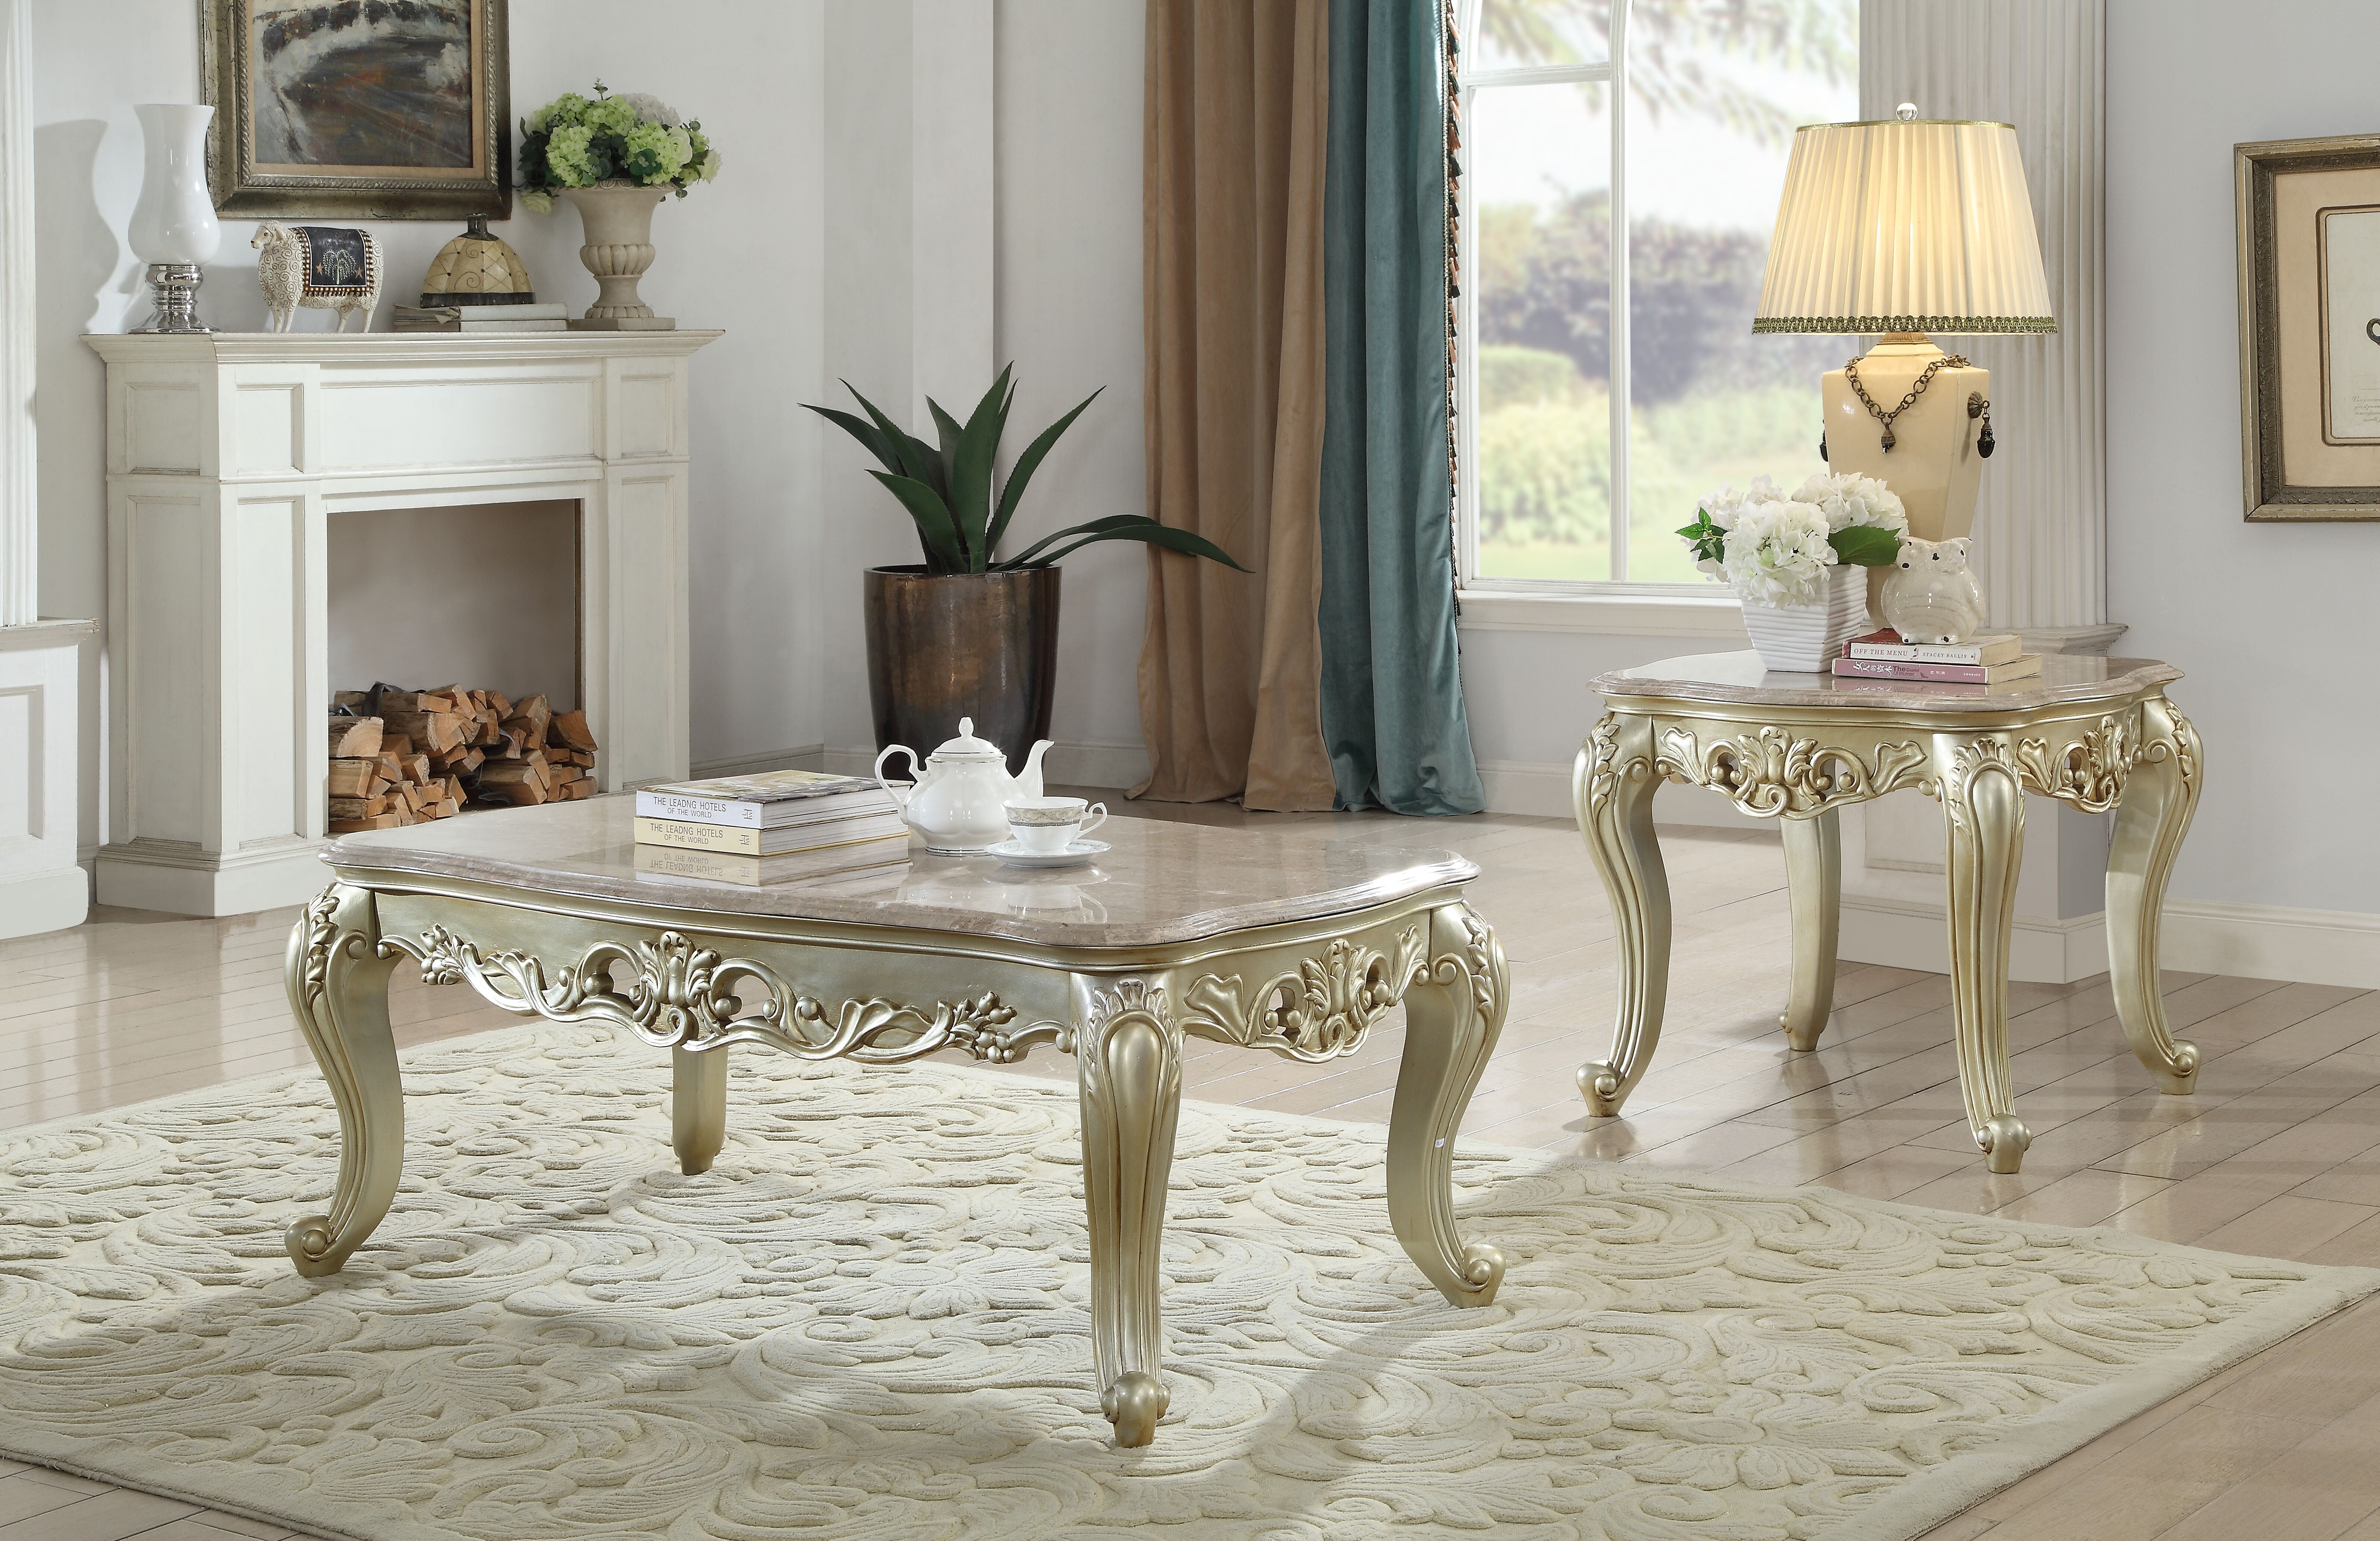 Picture of ACME 82442 Gorsedd End Table with Marble Top - Marble & Antique White - 24 x 28 x 28 in.